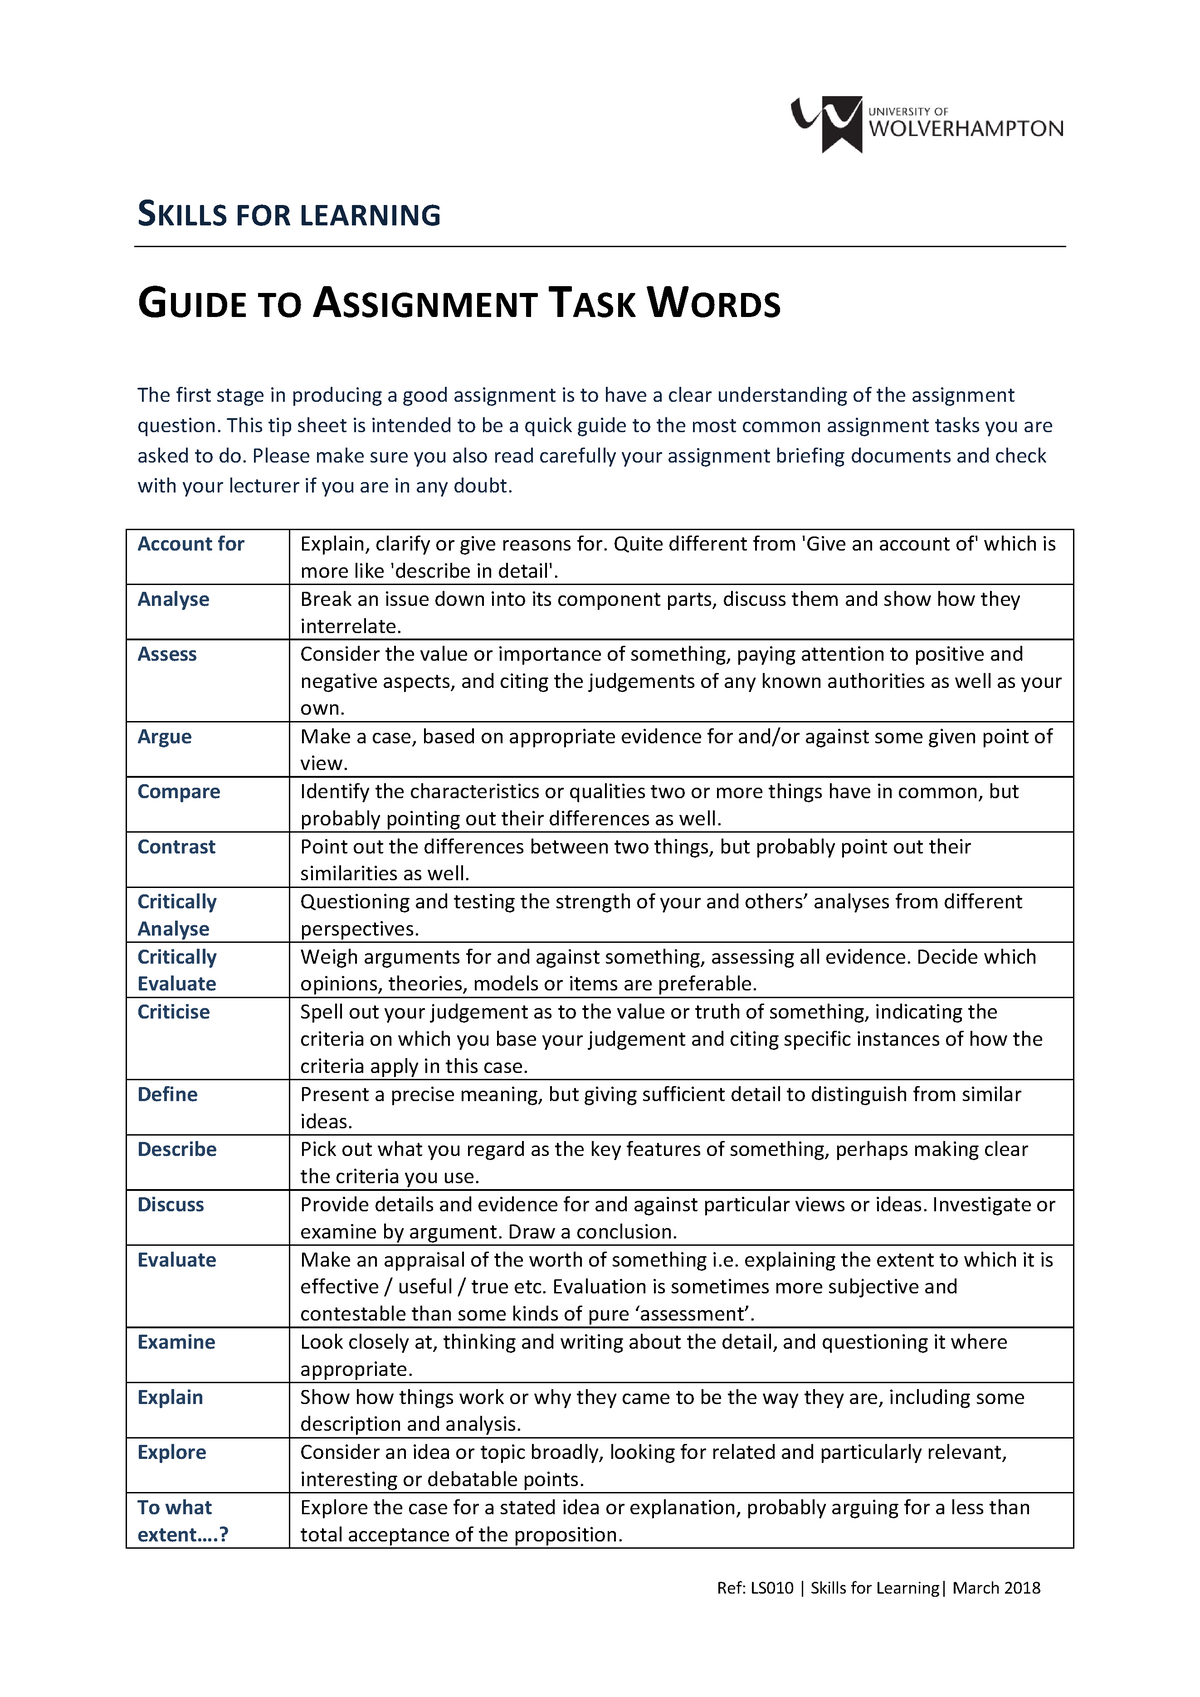 guide to assignment task words